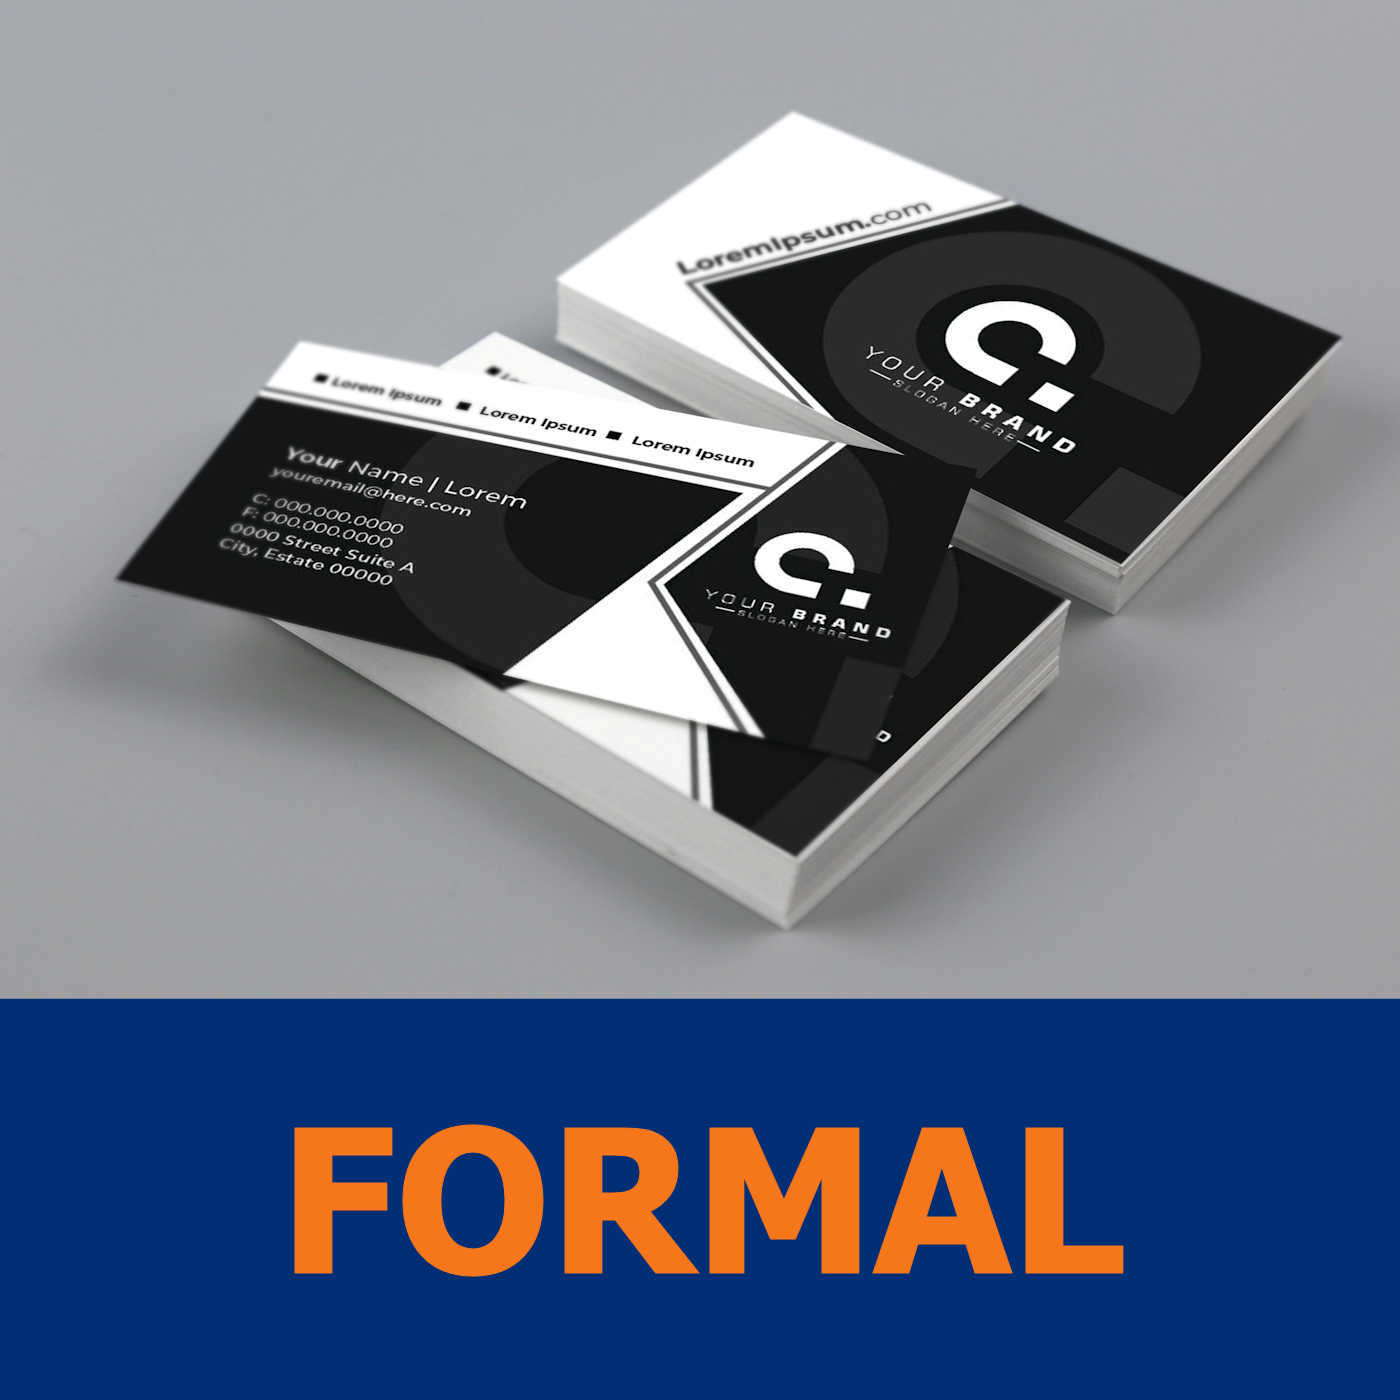 AVS Rize - Business Card Formal Style - LG